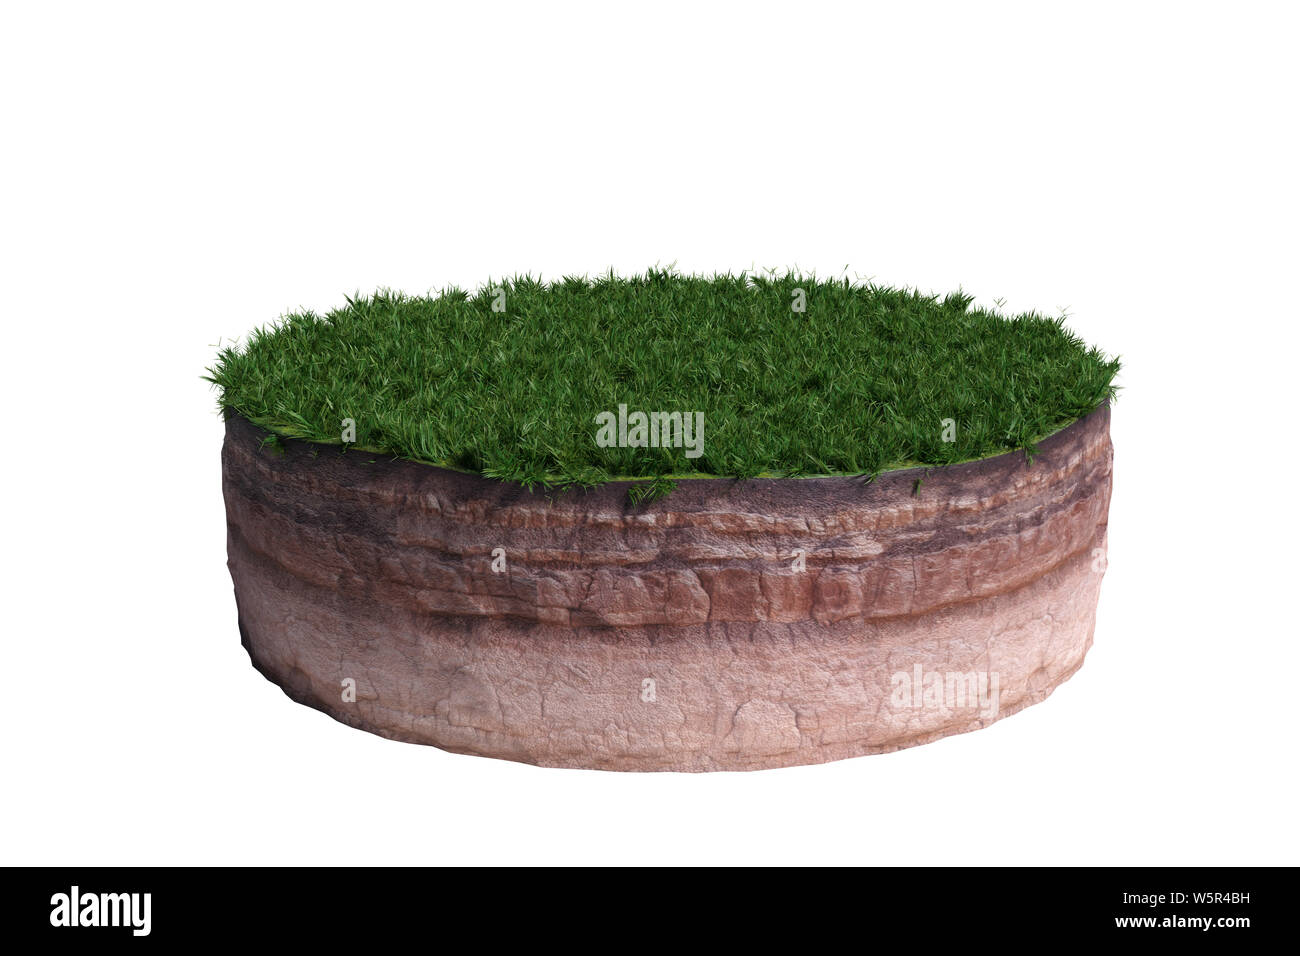 model of a cross section of ground with grass on the surface (3d illustration, isolated on white background) Stock Photo